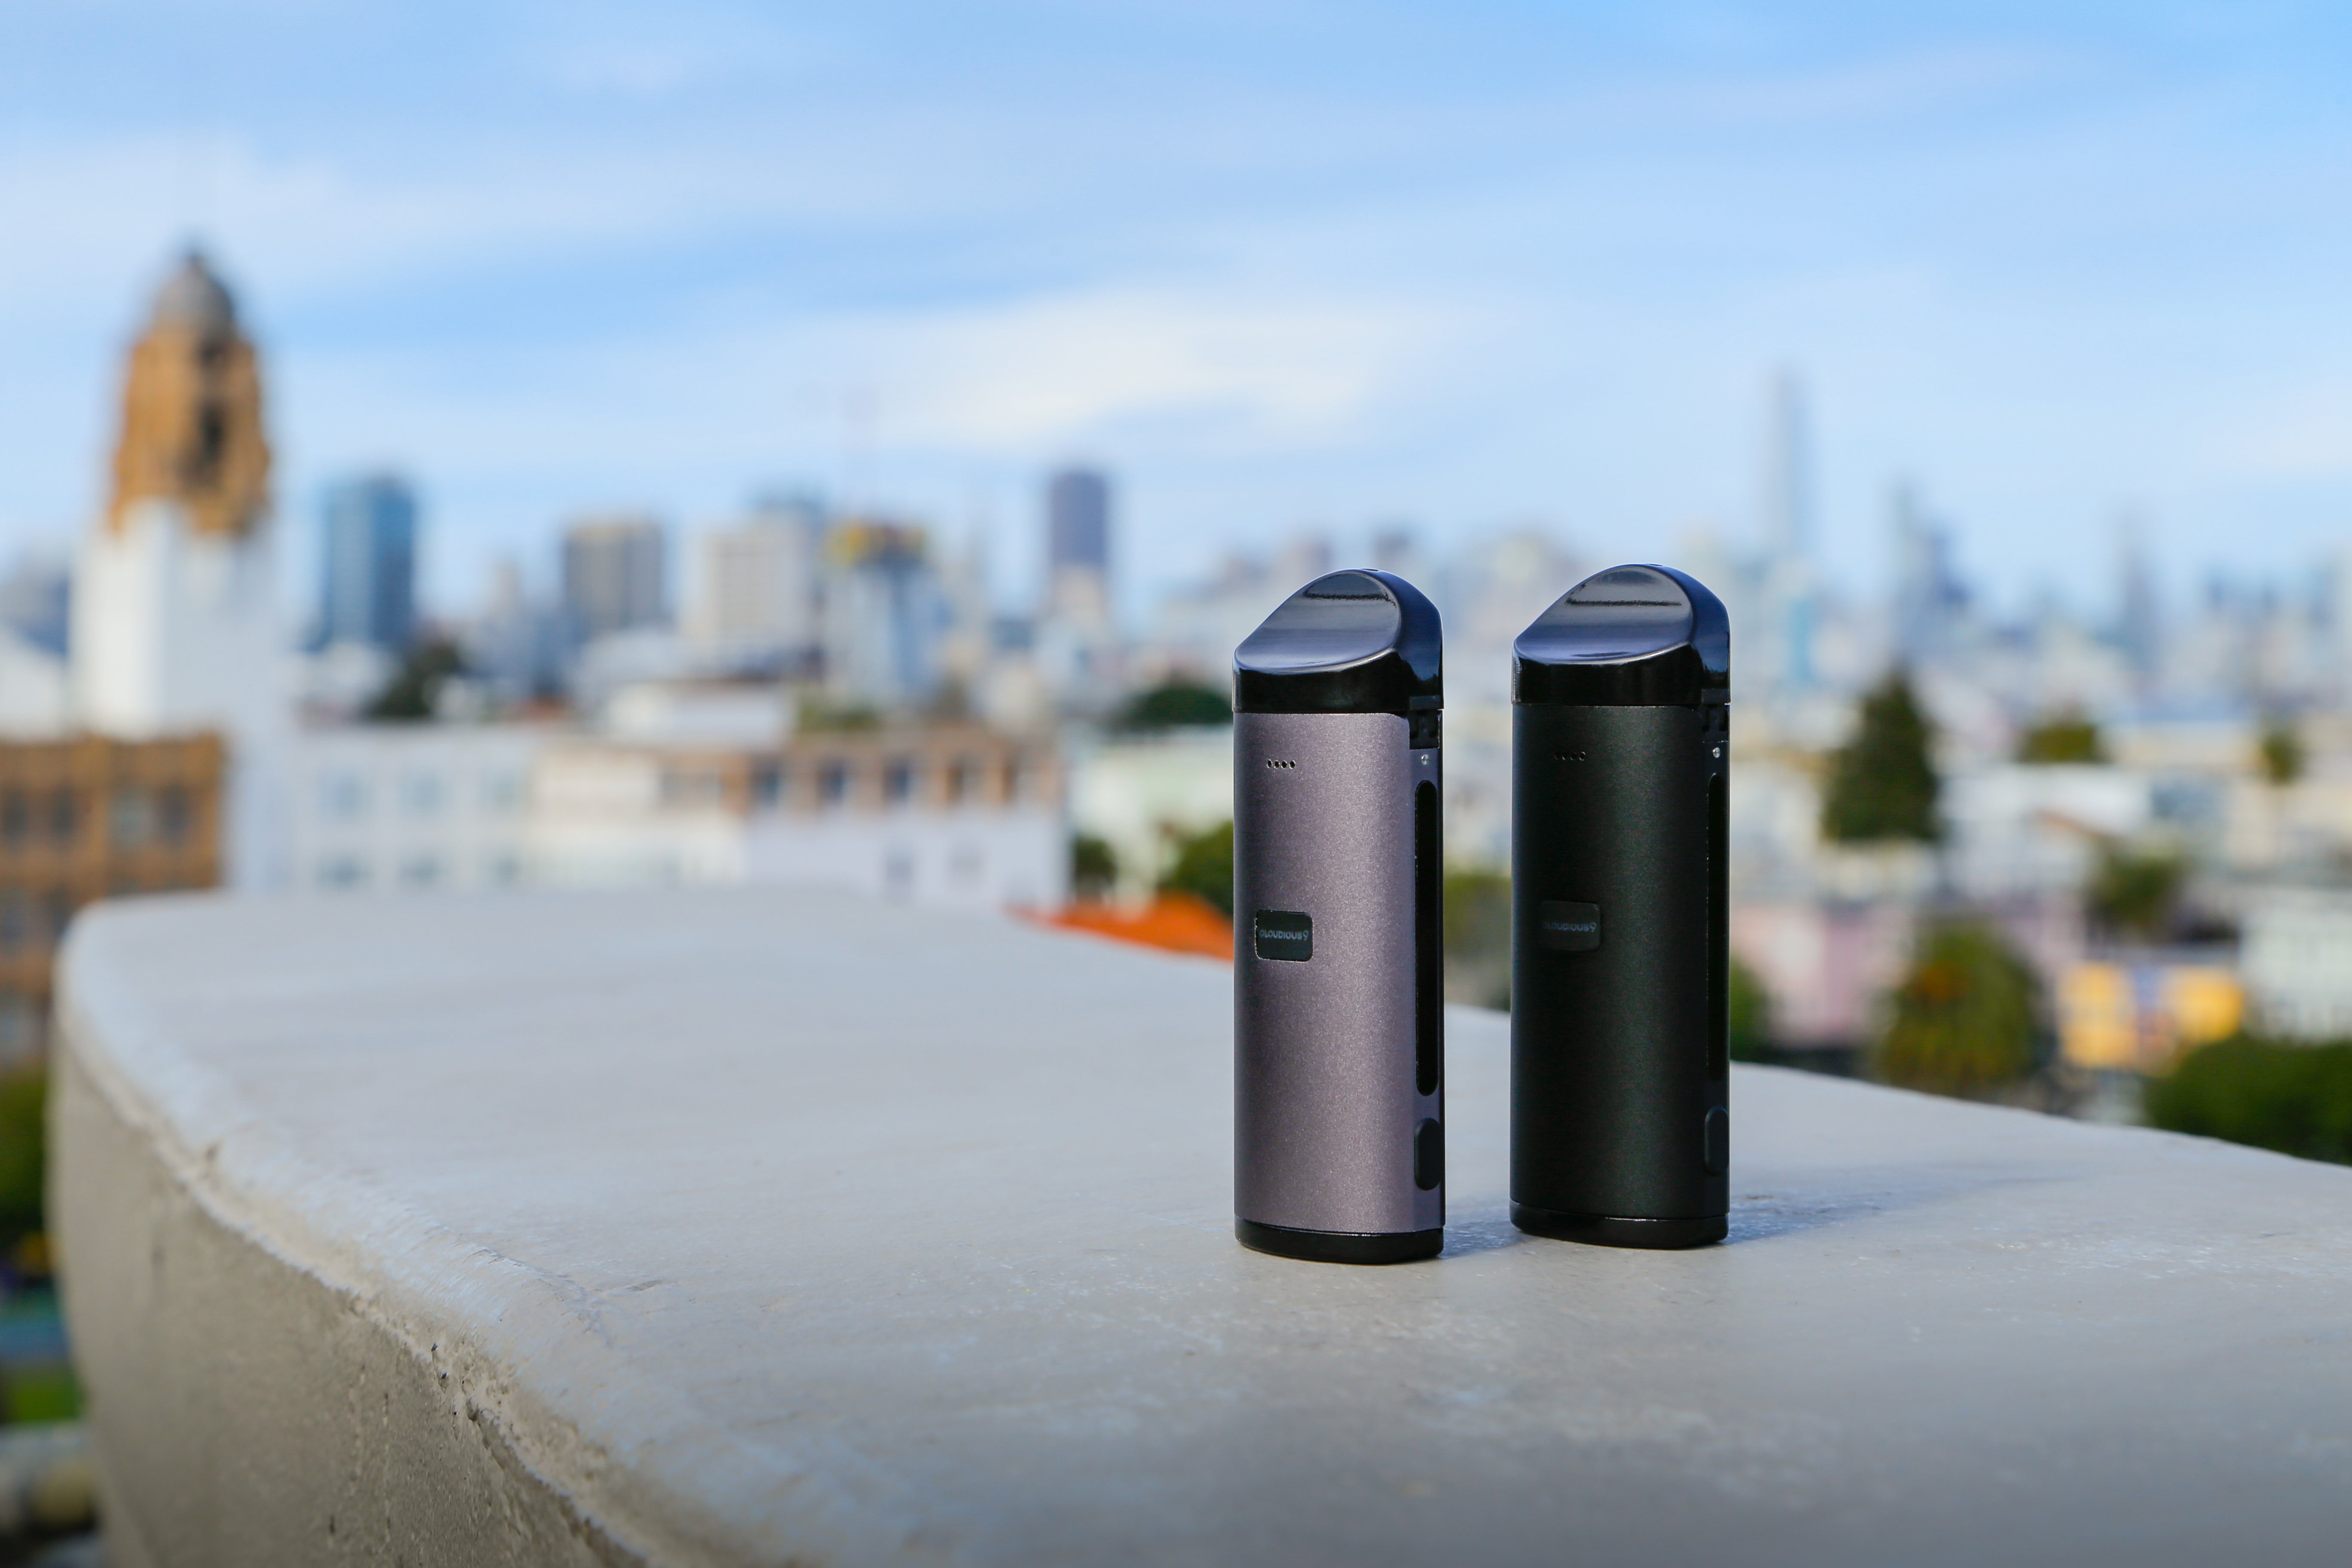 Two Cloudious9 Atomic9 dry flower vapes — one black and one silver — sit perched on a building ledge, overlooking a city skyline. 